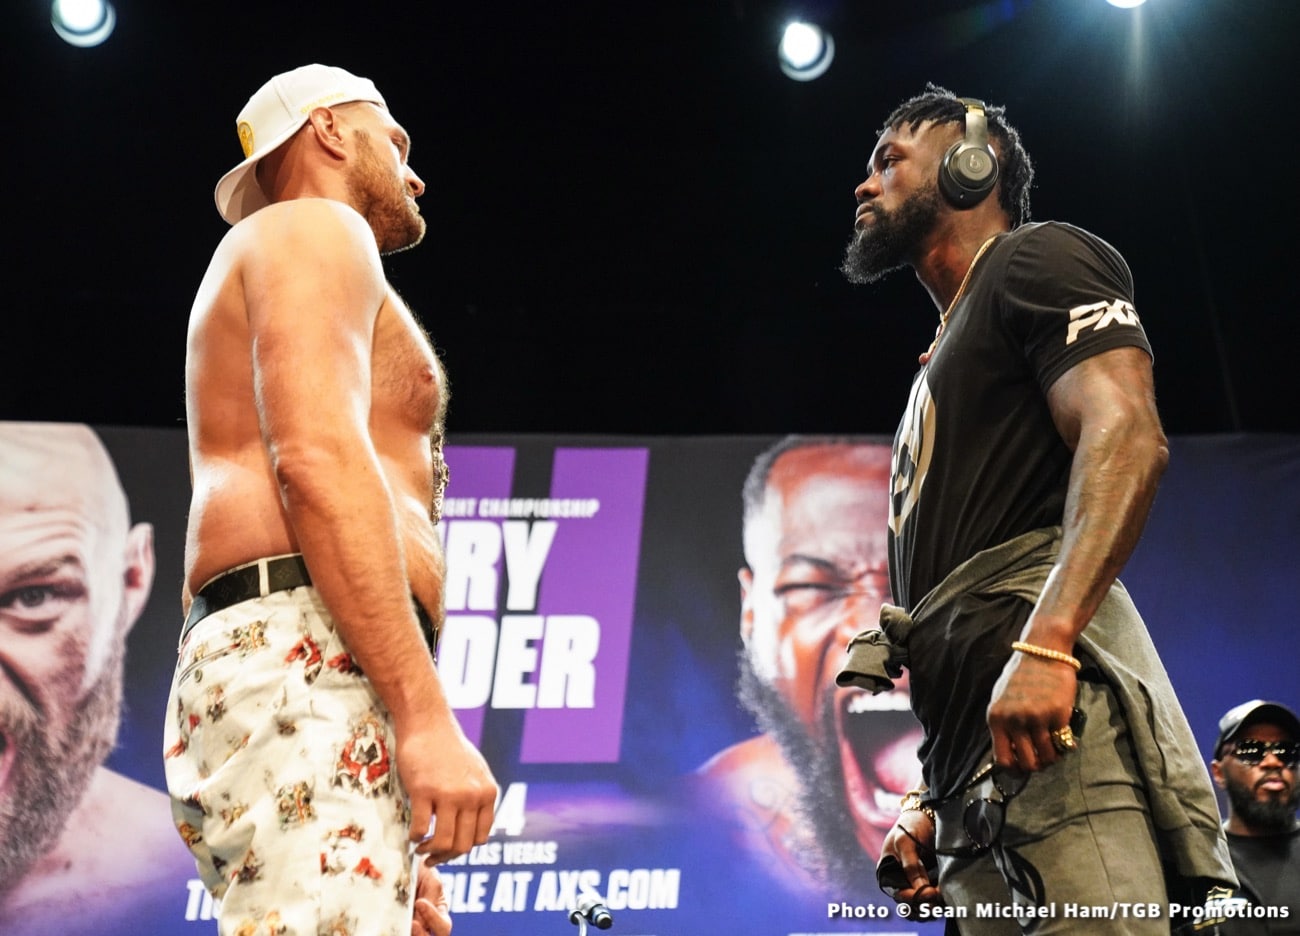 Image: Deontay Wilder expects Fury to cheat in trilogy on July 24th